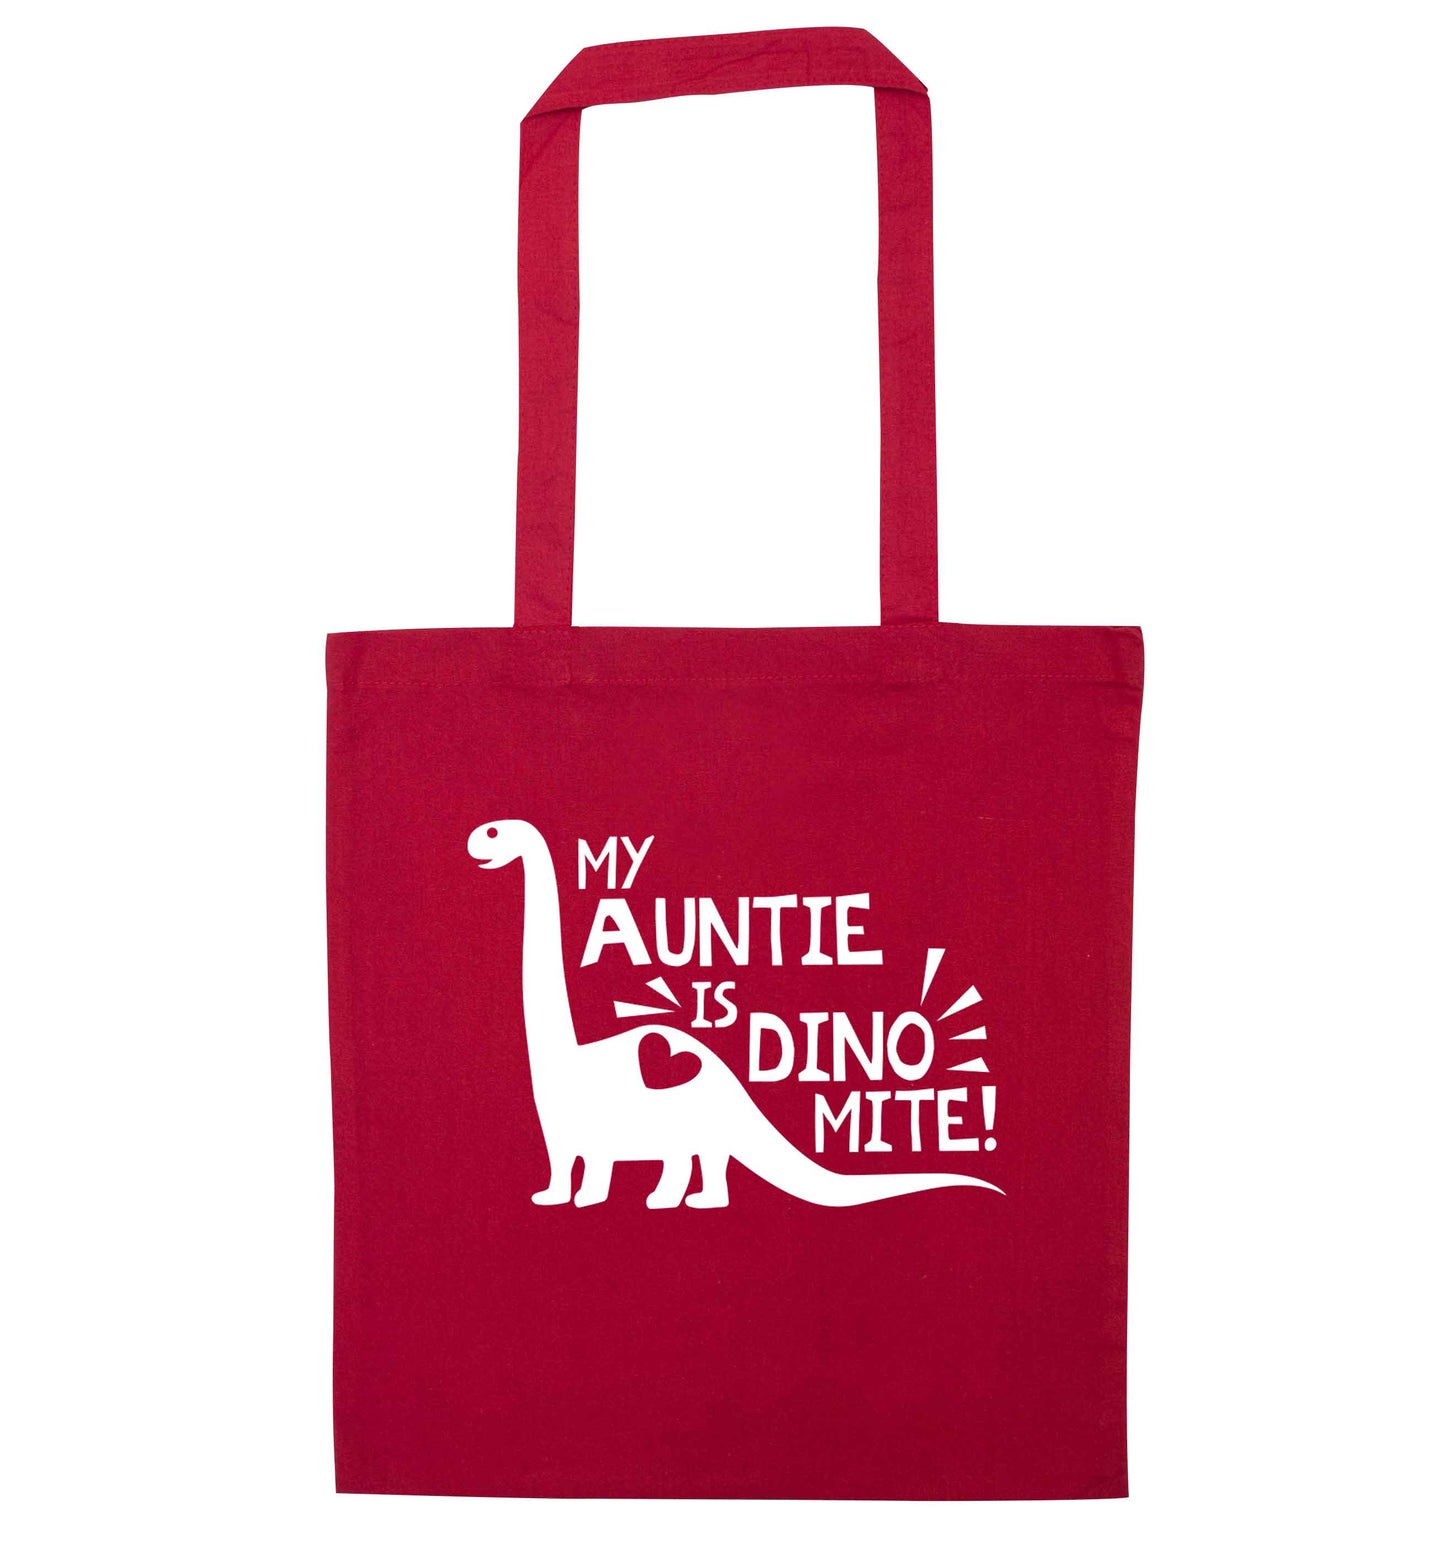 My auntie is dinomite! red tote bag